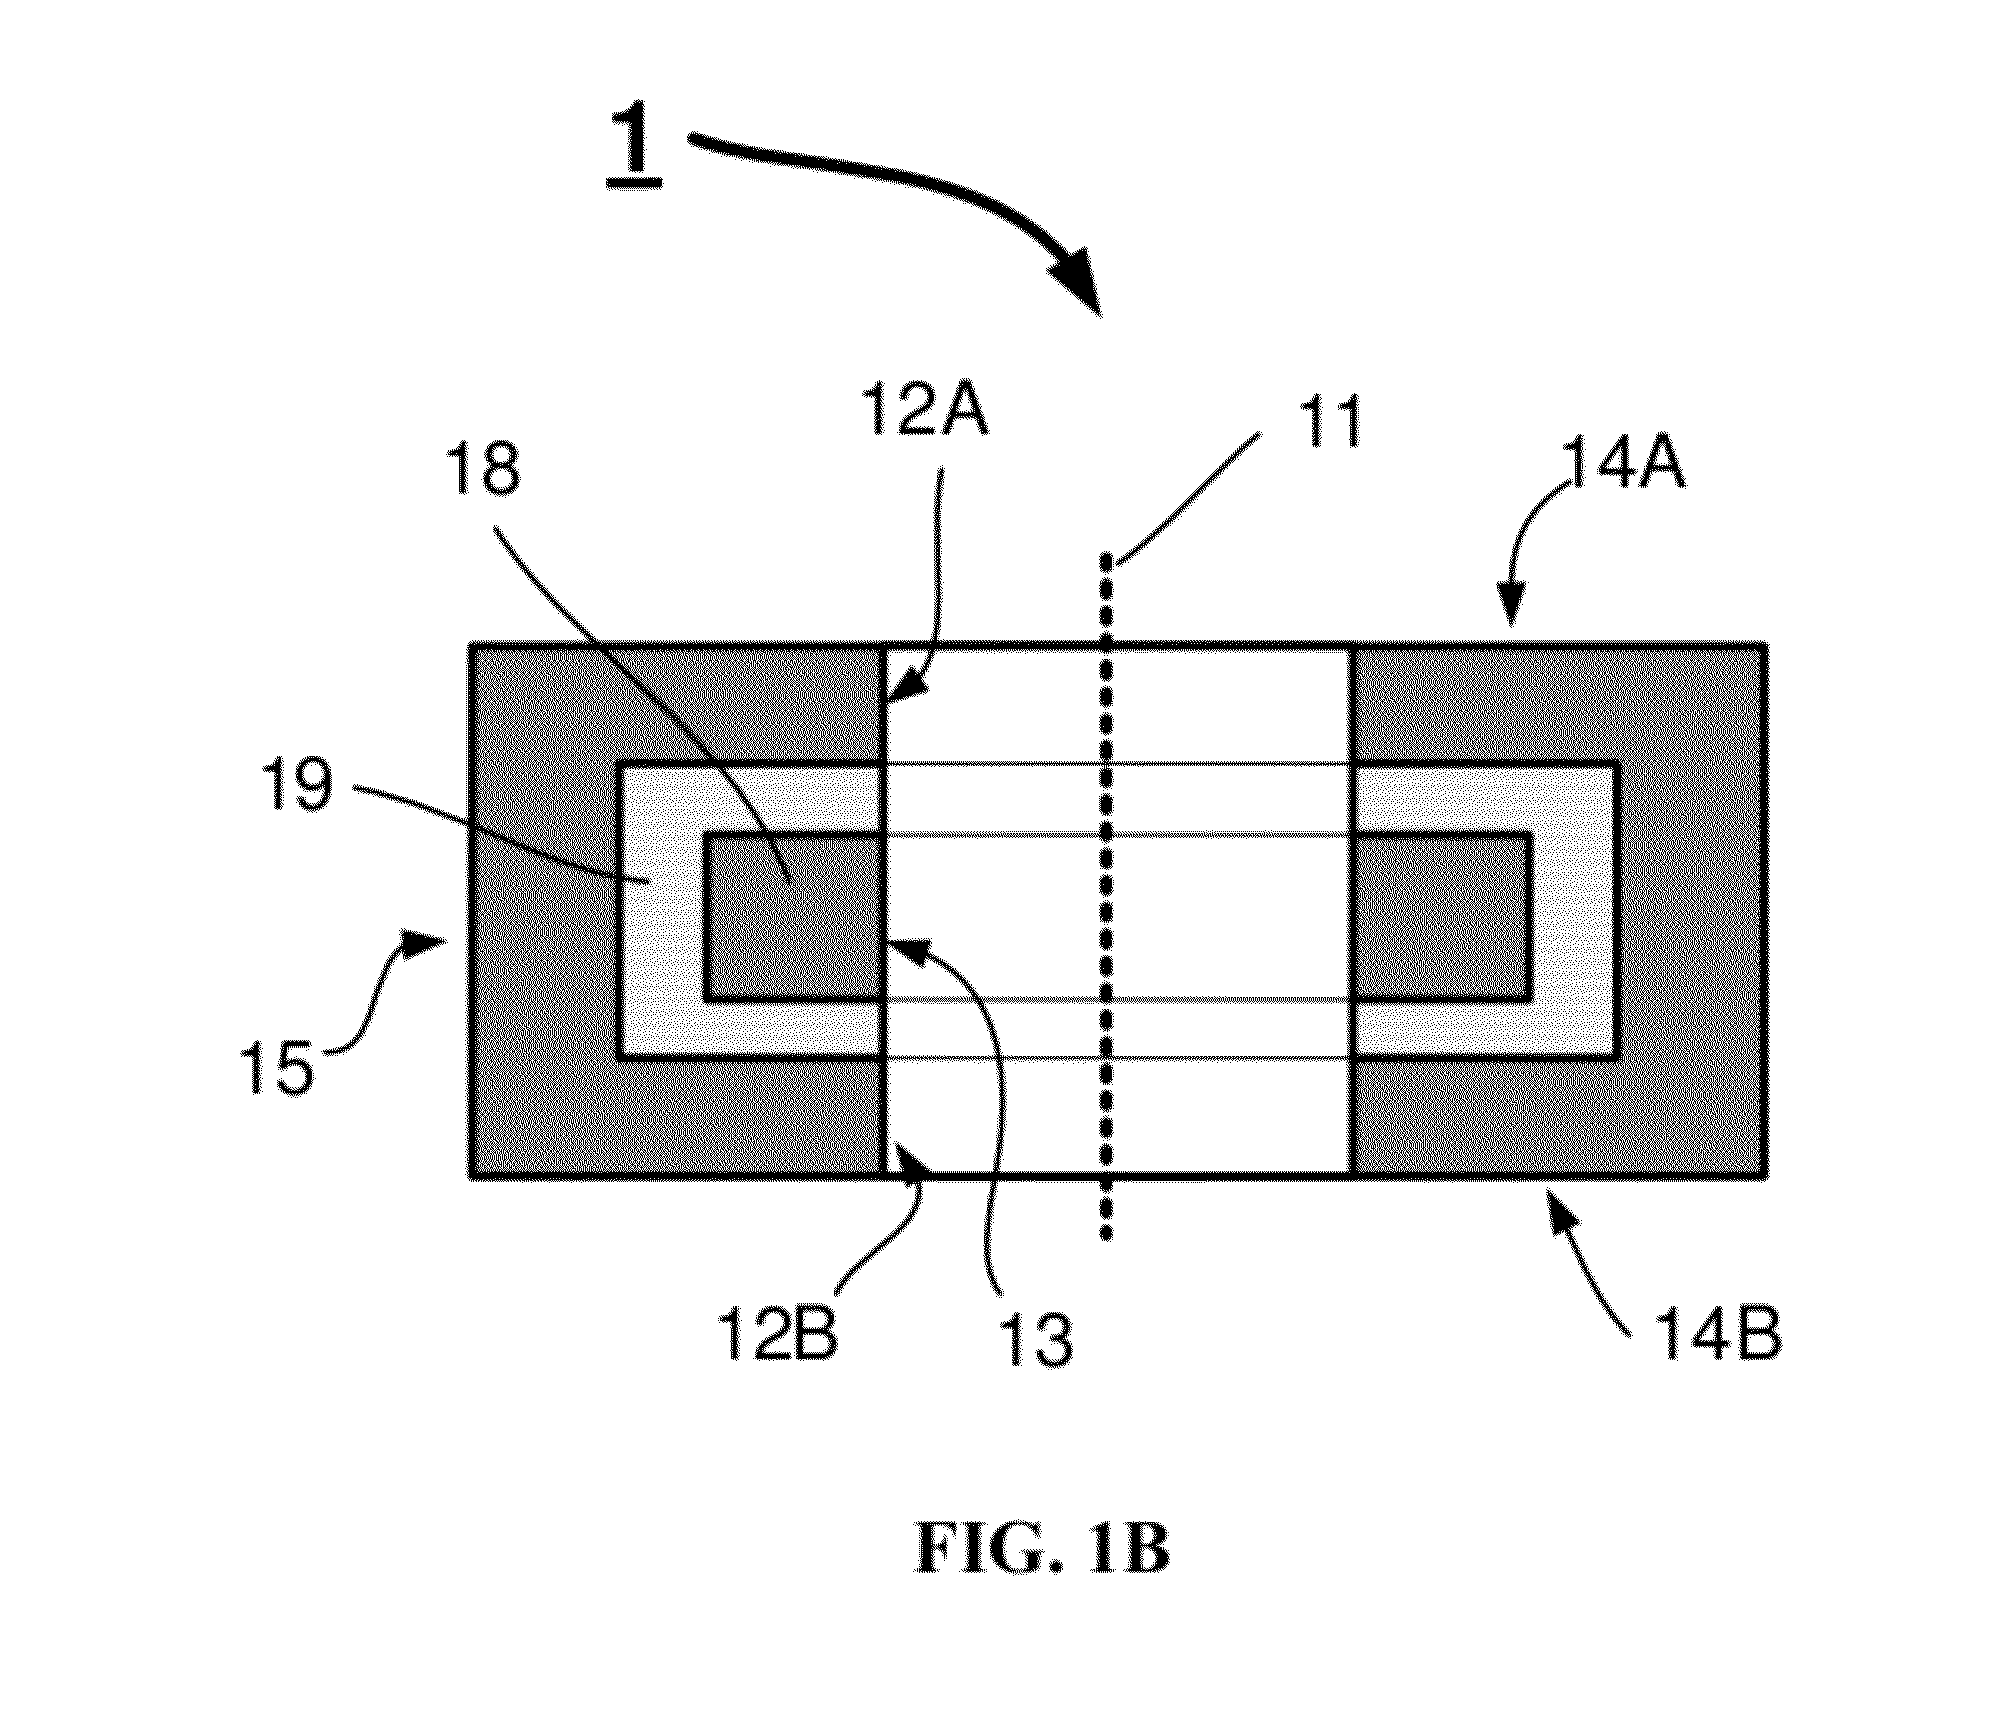 Method for centering an optical element in a TEM comprising a contrast enhancing element